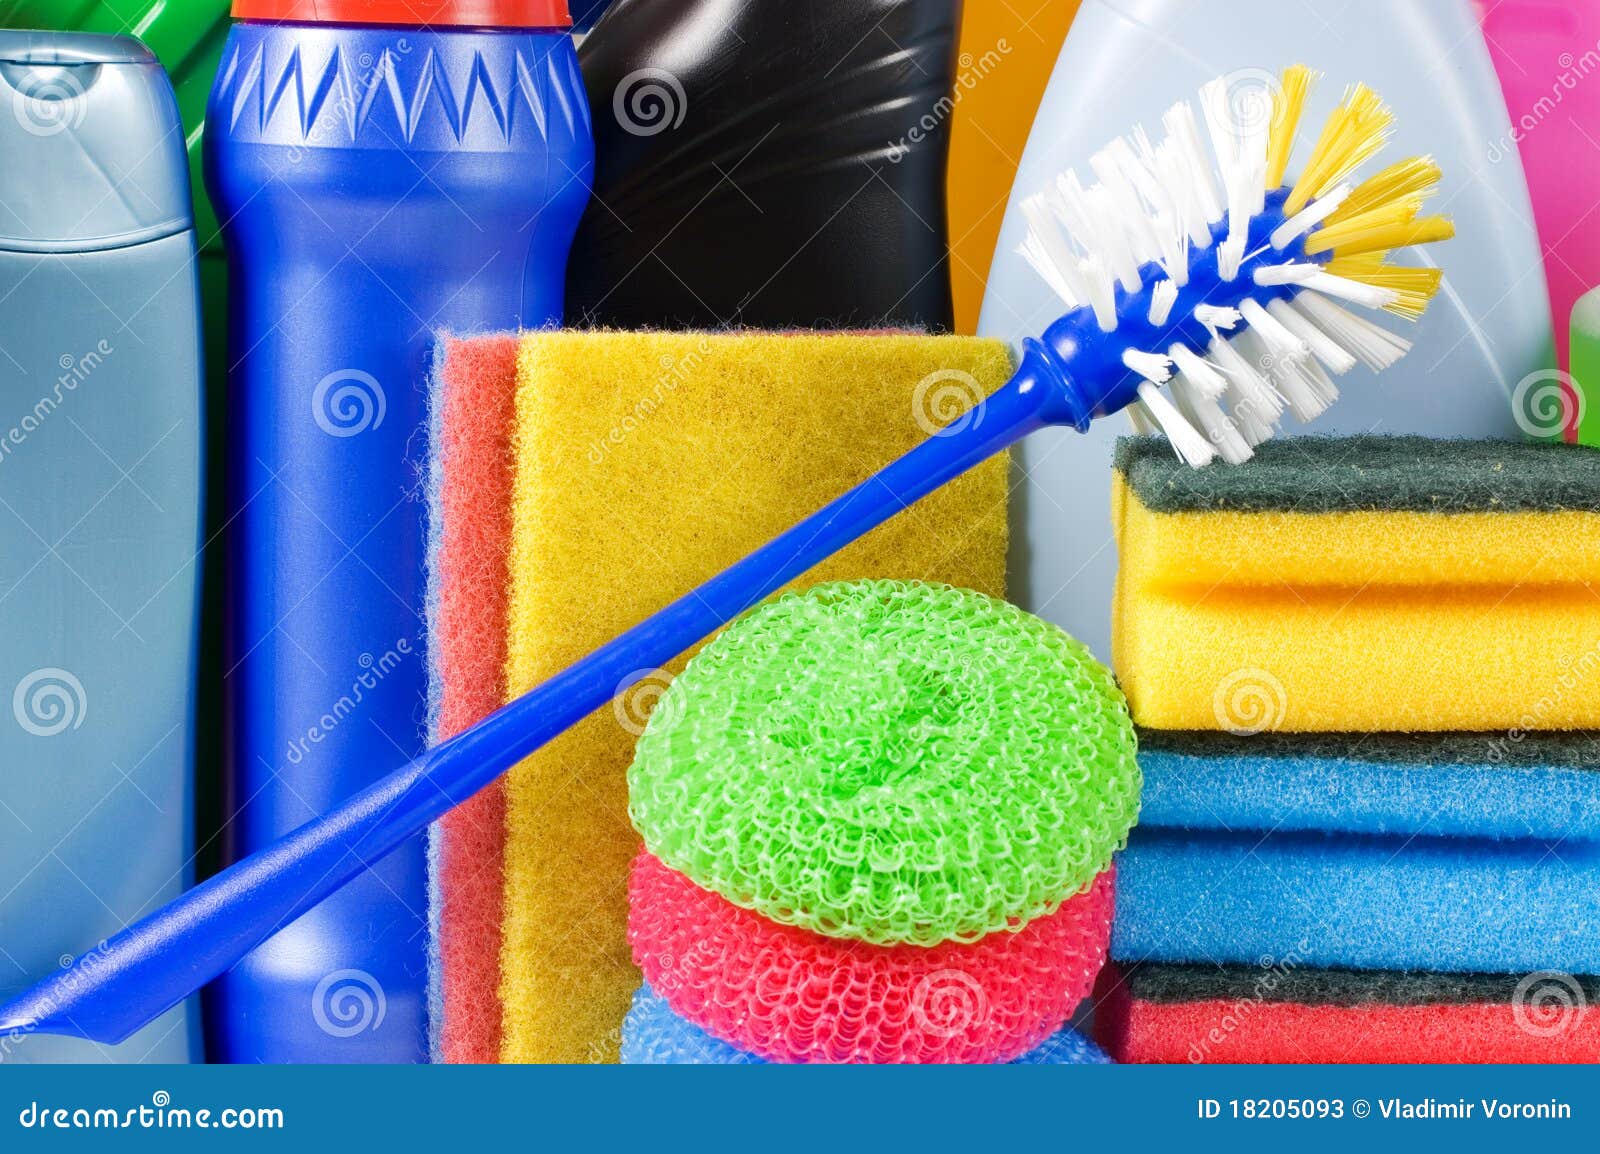 assortment of means for cleaning